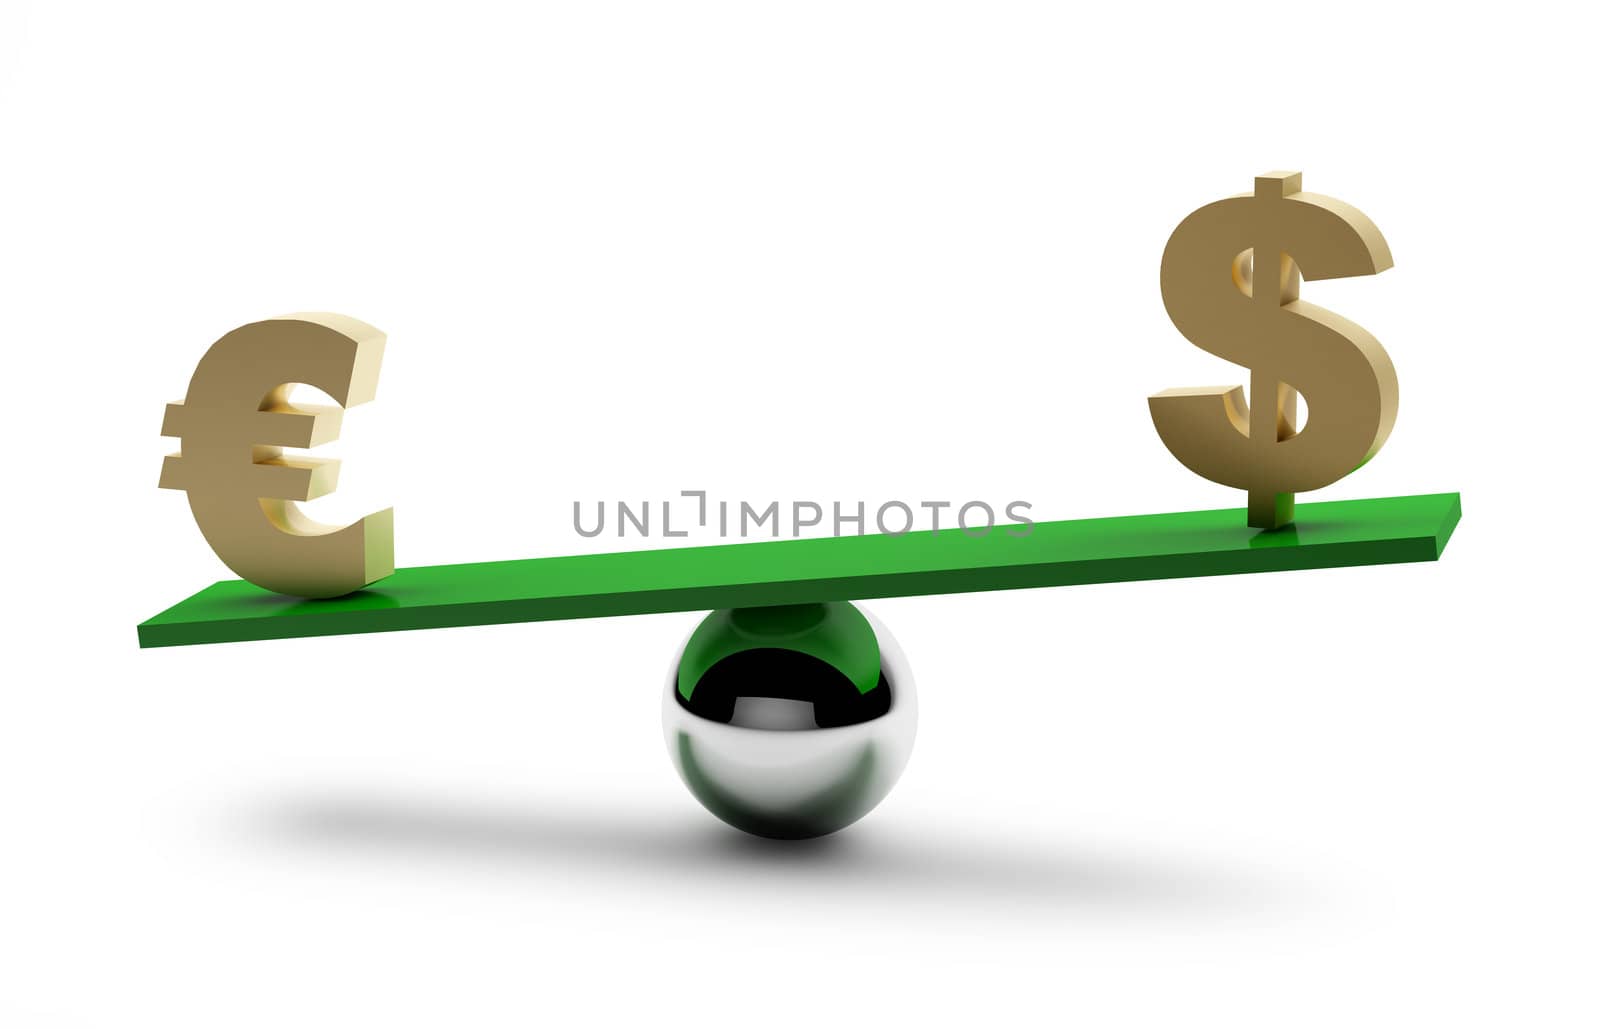 Balance Of Dollar And Euro. This image contains clipping path for easy background removing.